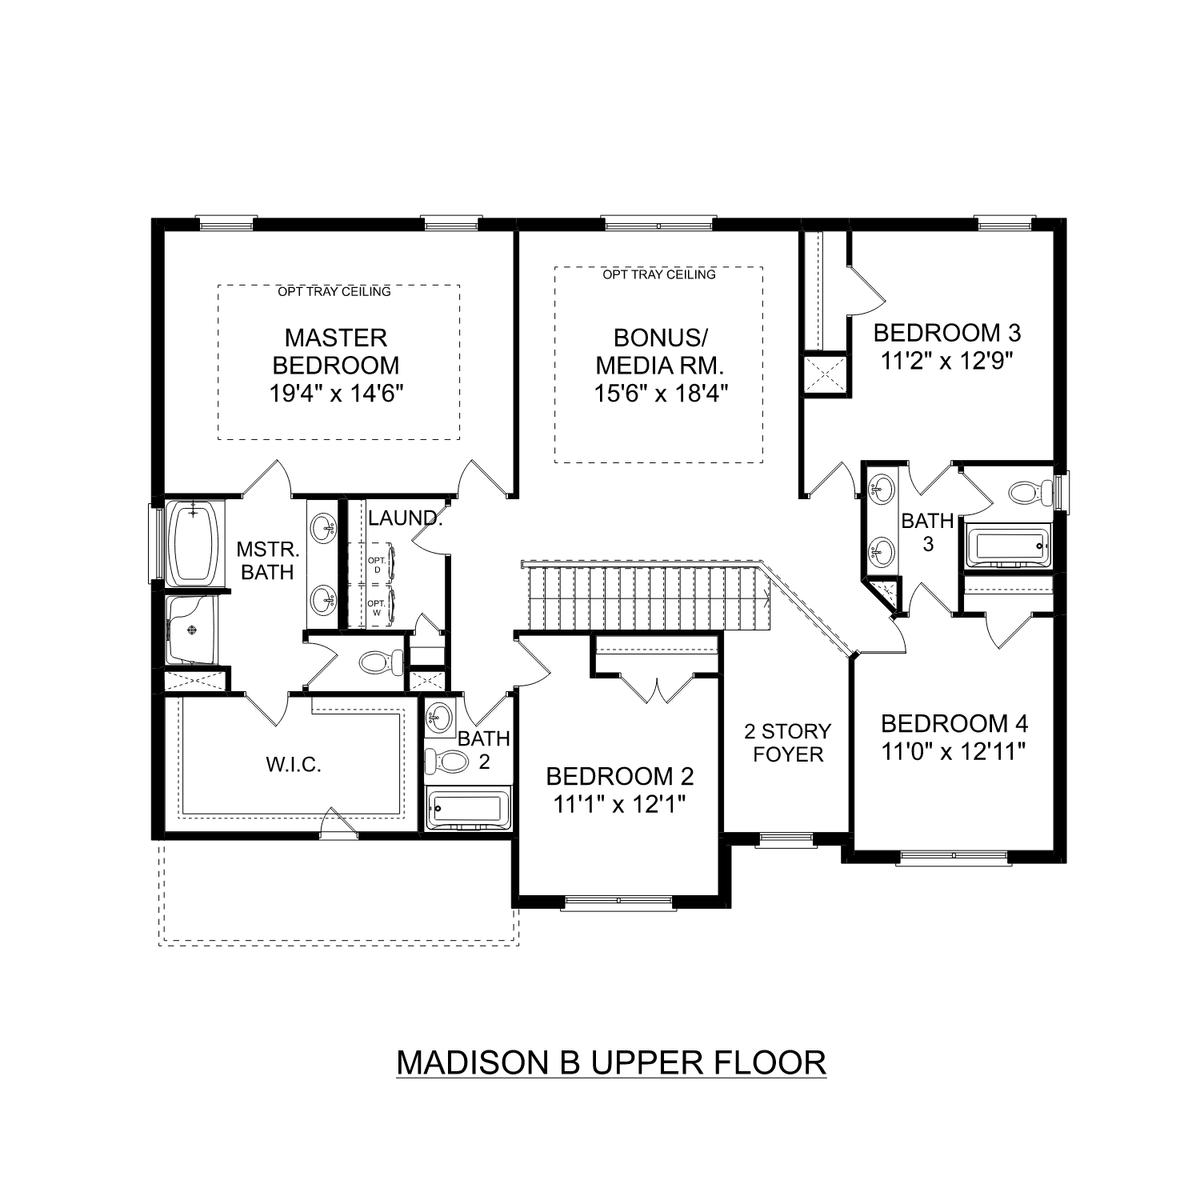 2 - The Madison B floor plan layout for 615 Magnolia Cove Lane SW in Davidson Homes' Magnolia Preserve community.